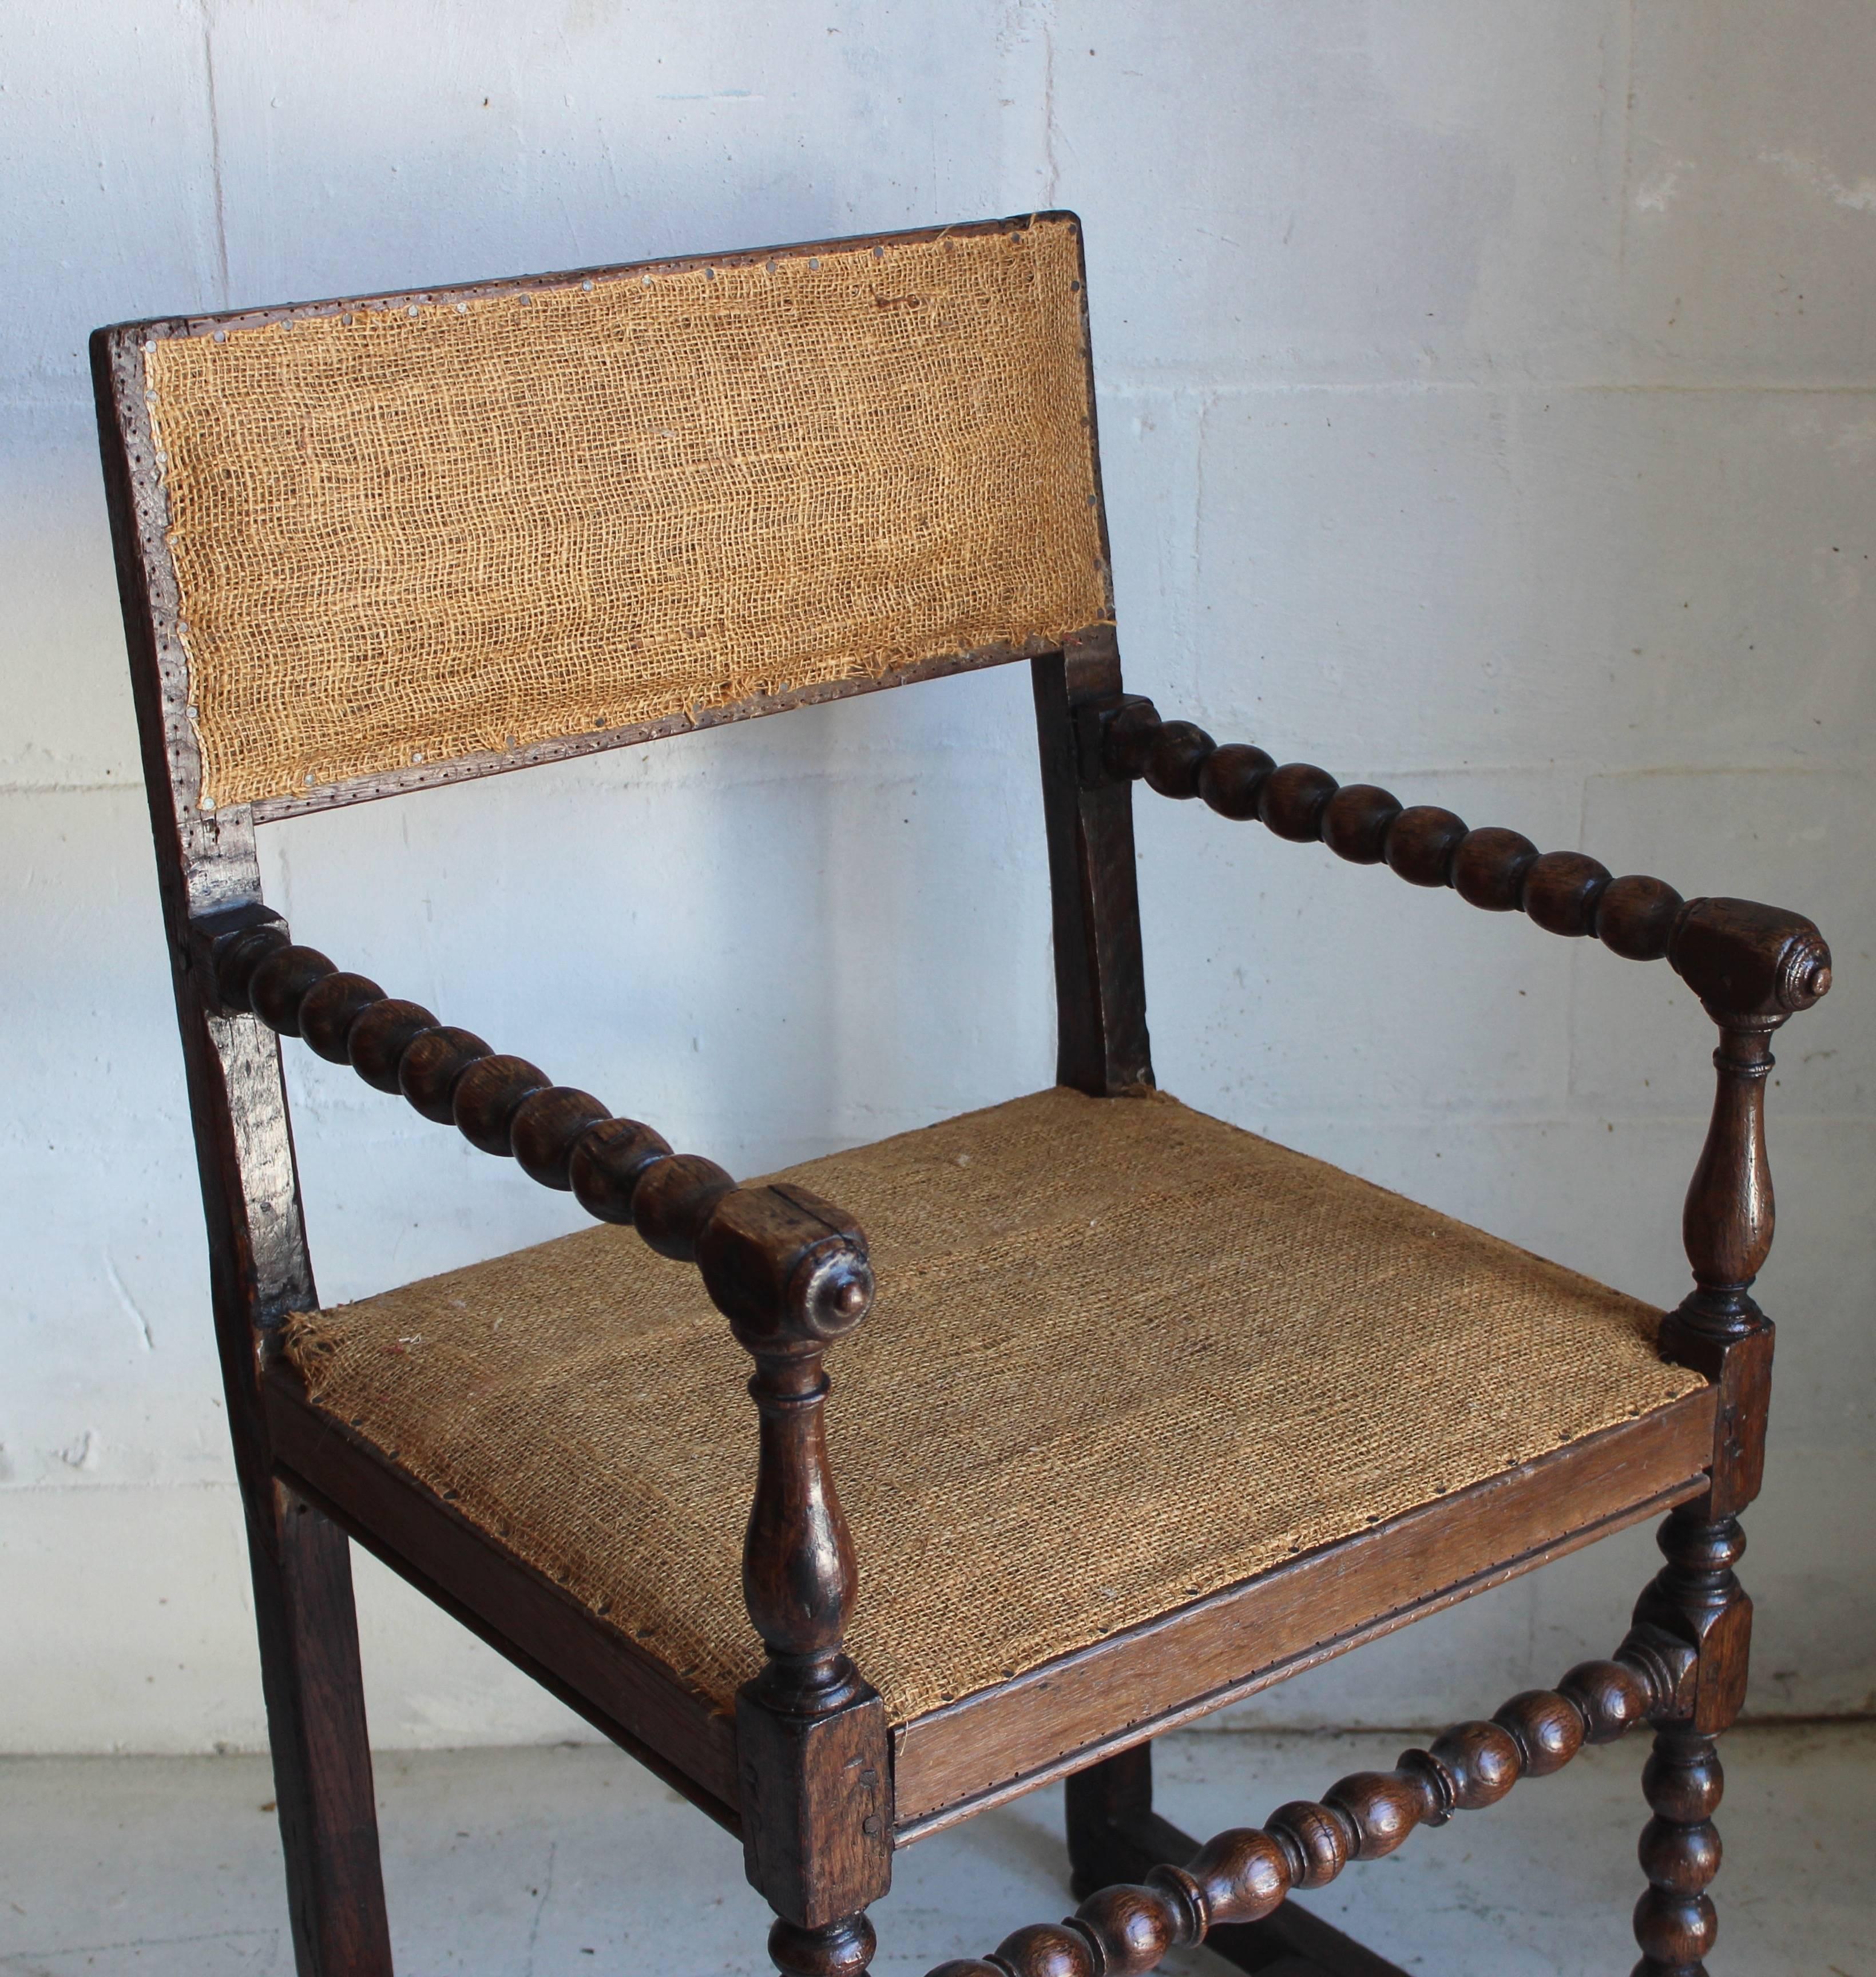 Early 19th century Continental turned walnut chair with upholstered seat and back.